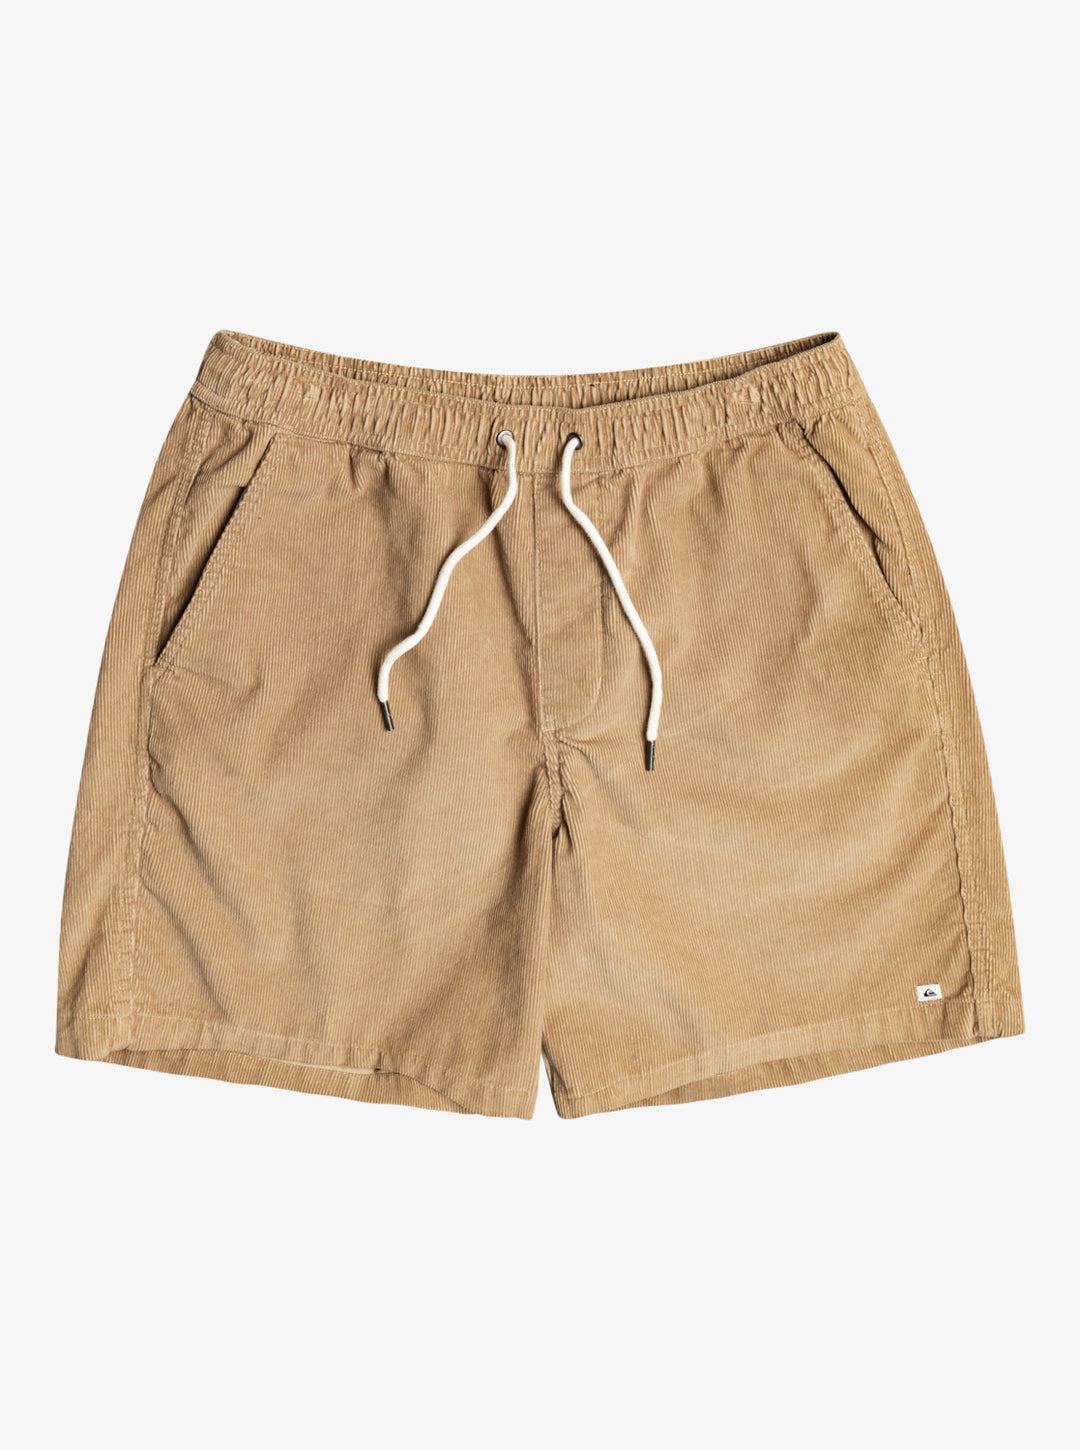 Quiksilver Taxer Cord Shorts - Plage (Front Detail)